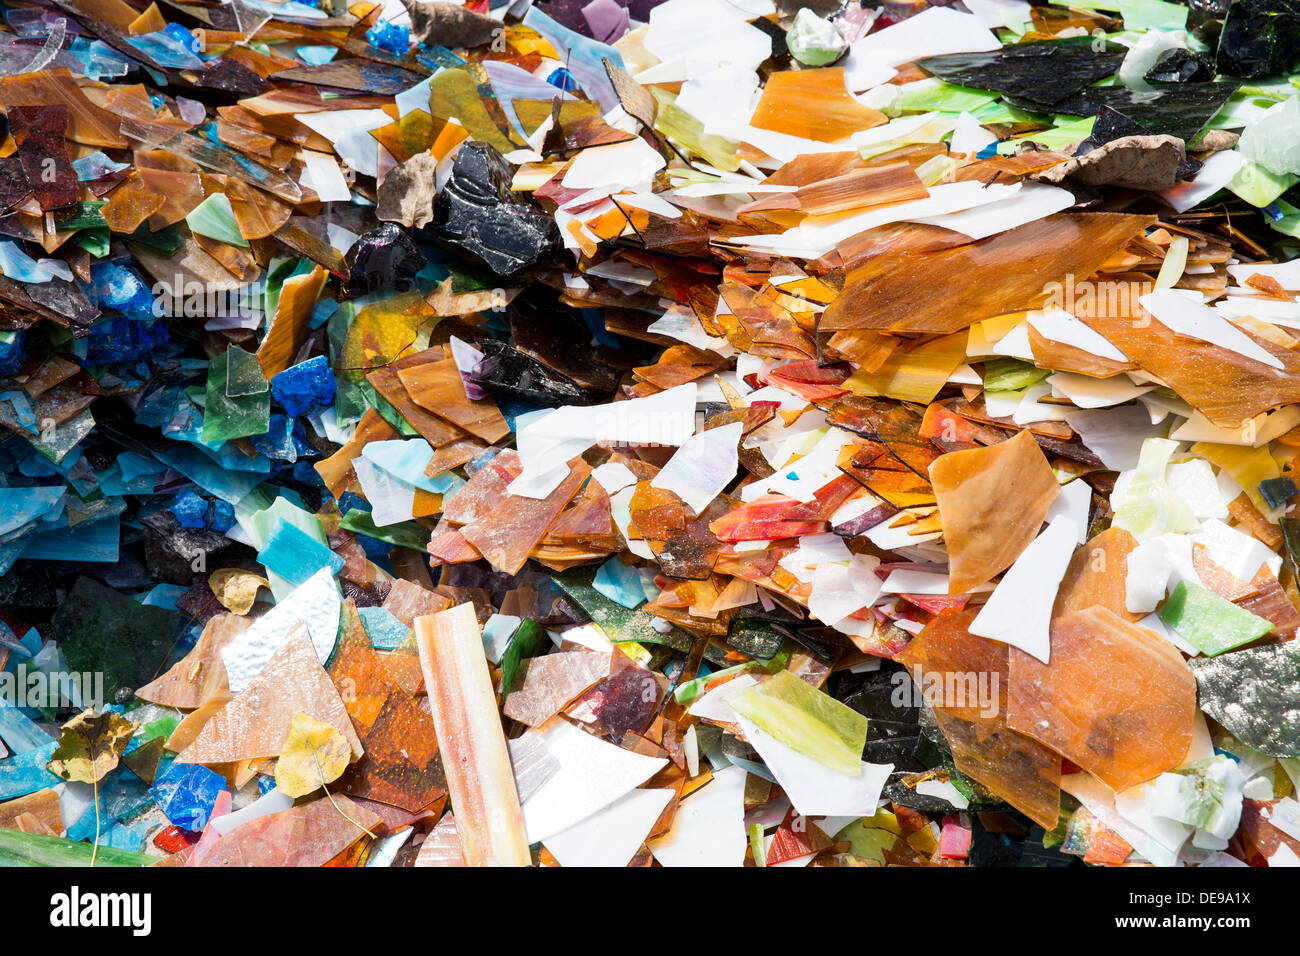 A scrap glass yard including stained glass and marbles. Stock Photo